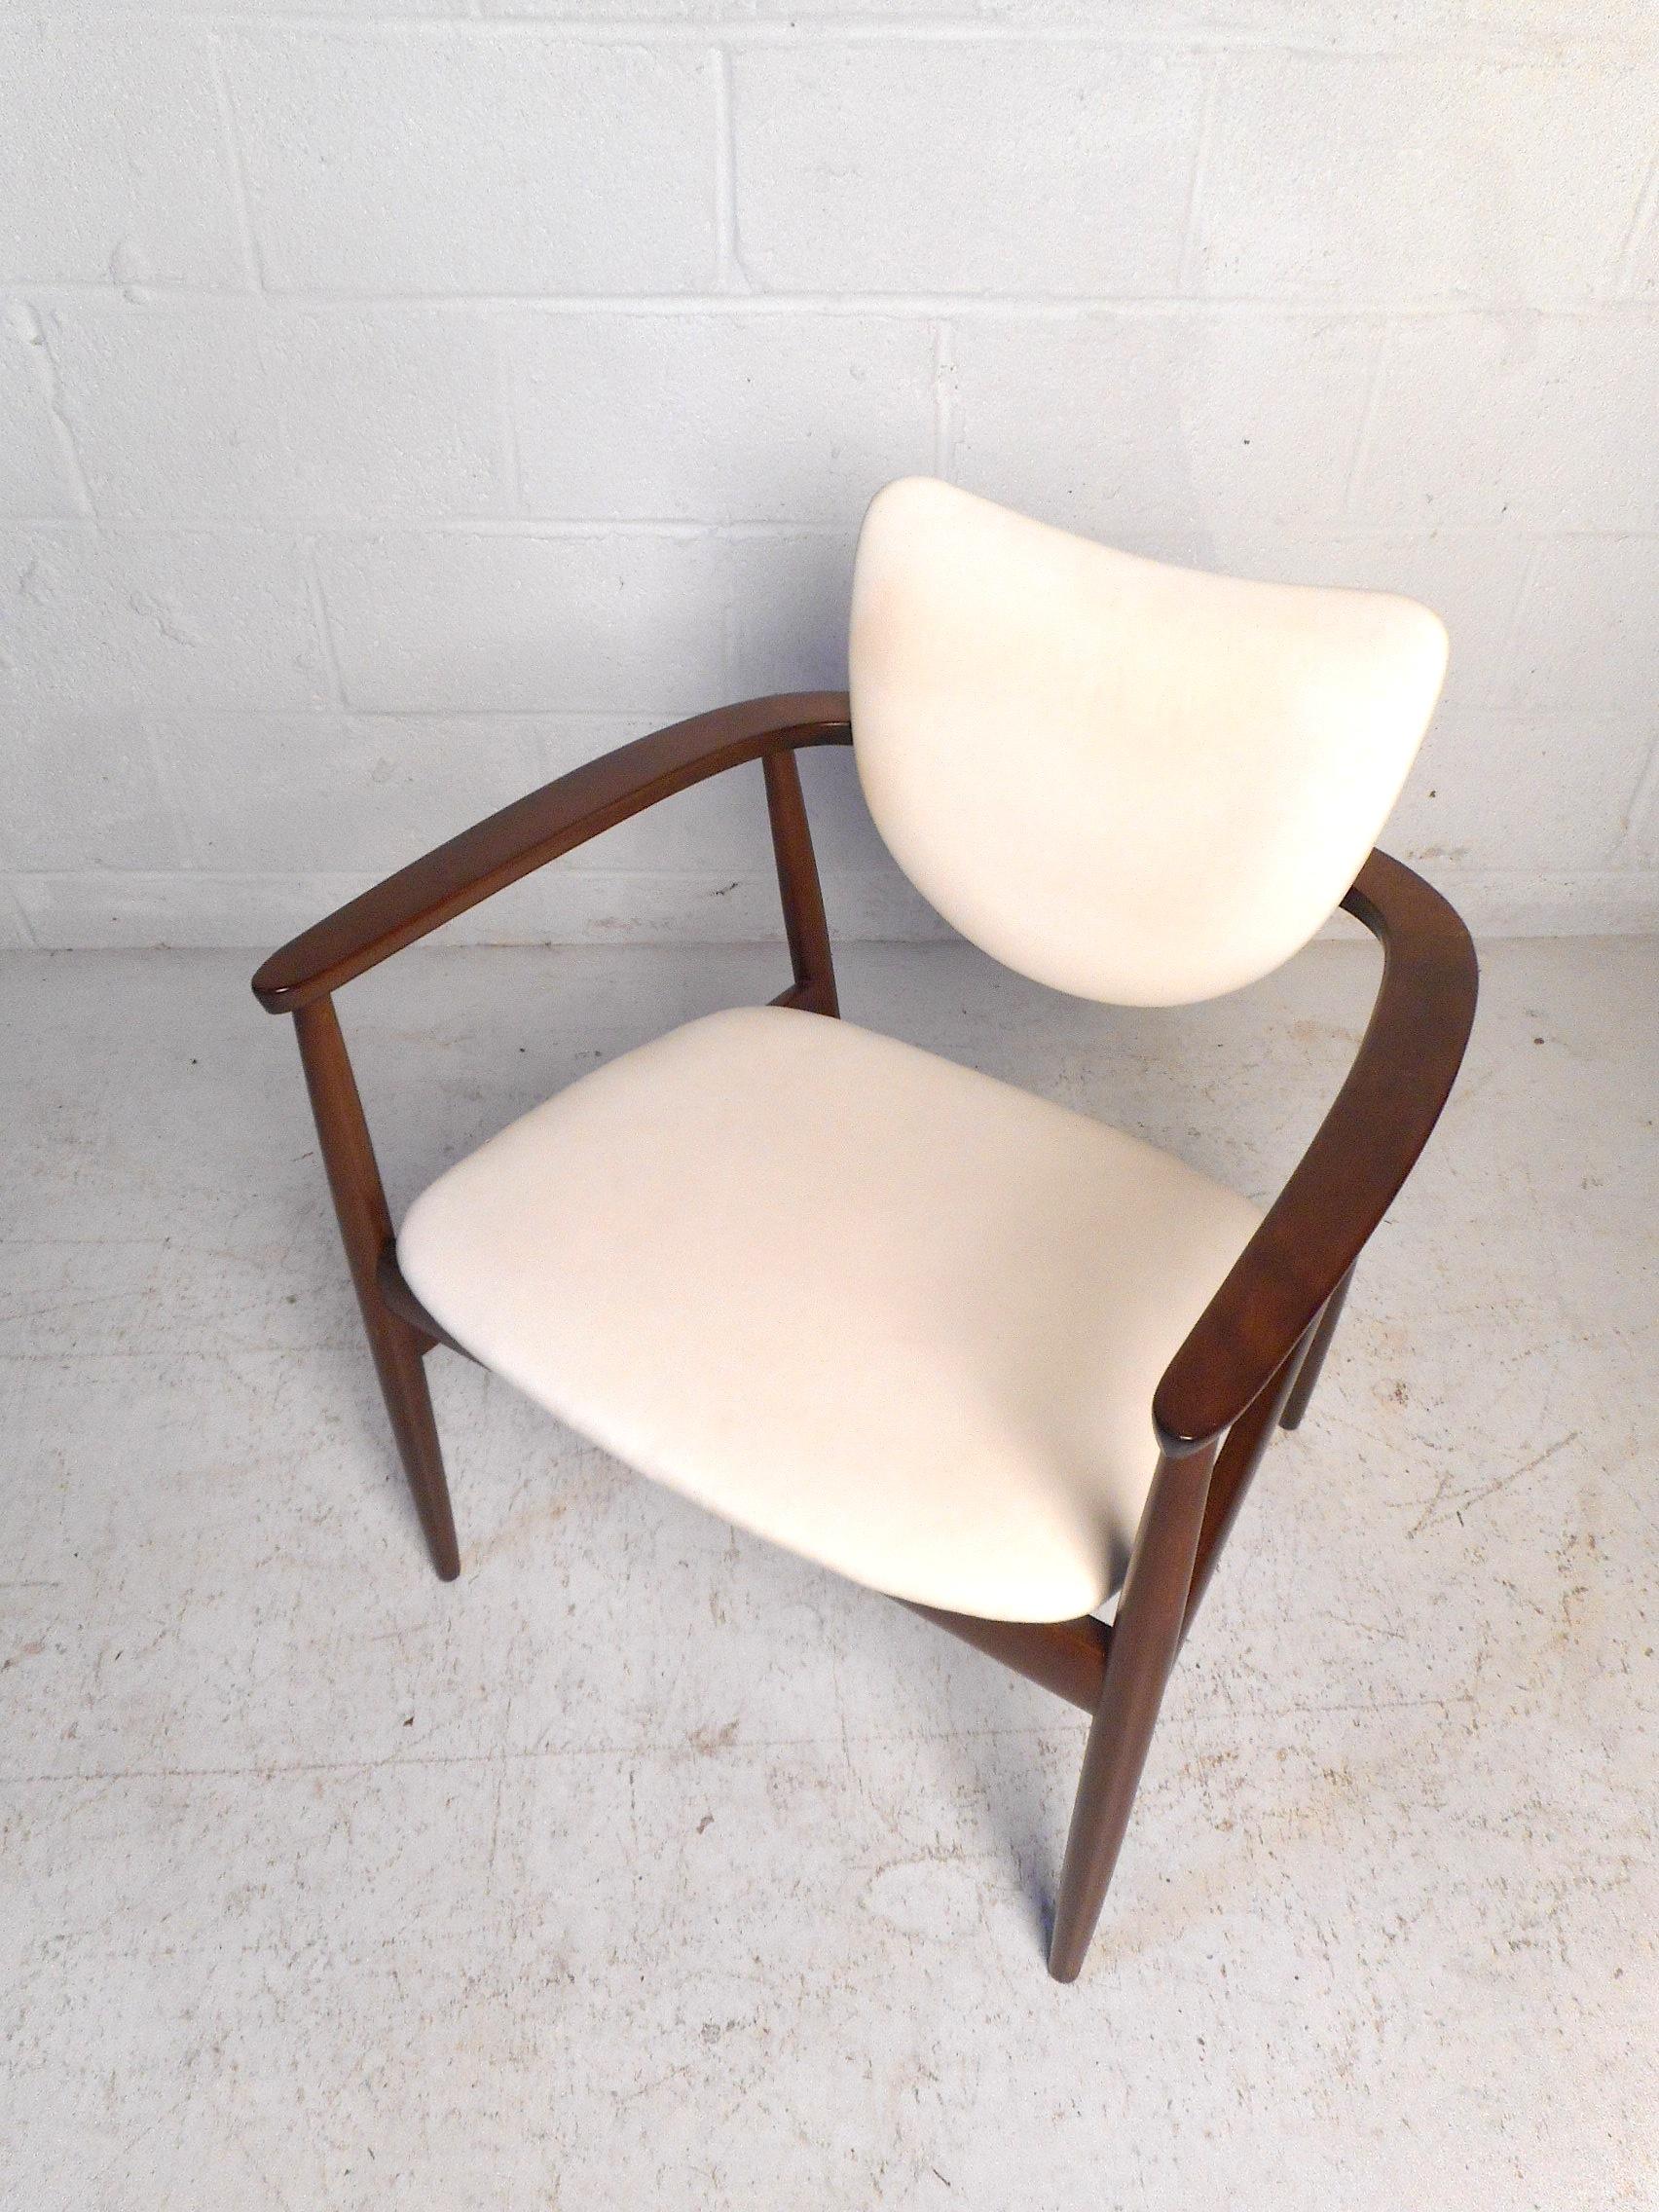 This impressive Danish modern chair features a sturdy finished walnut frame, sleek white faux-leather upholstery, sculpted armrests, and an interestingly contoured backrest giving the chair a unique visual profile. This chair is sure to compliment